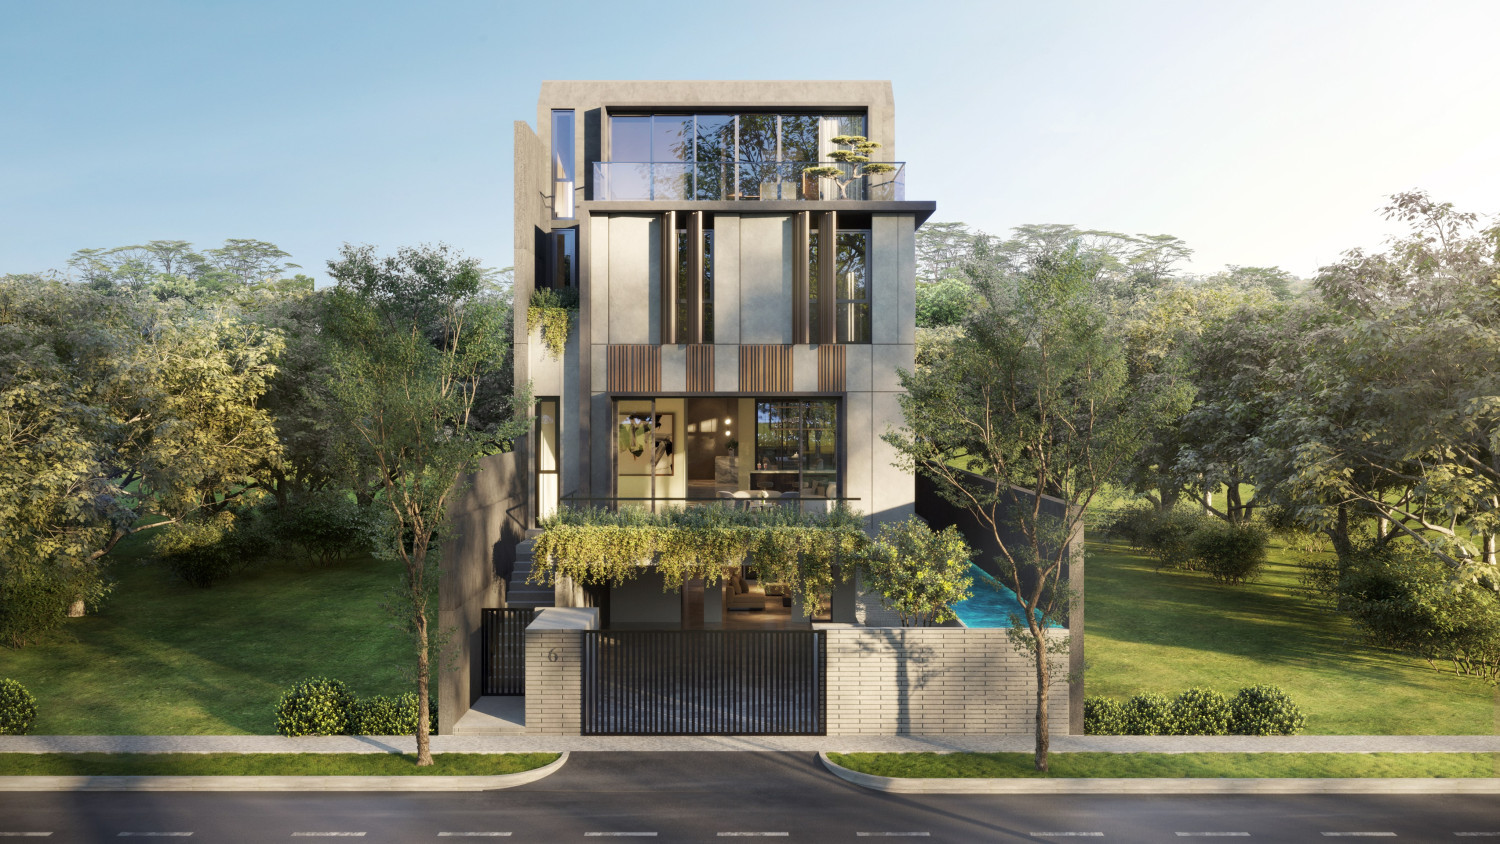 New freehold semi-detached house in Greenleaf Lane for sale at $14.5 mil - Property News